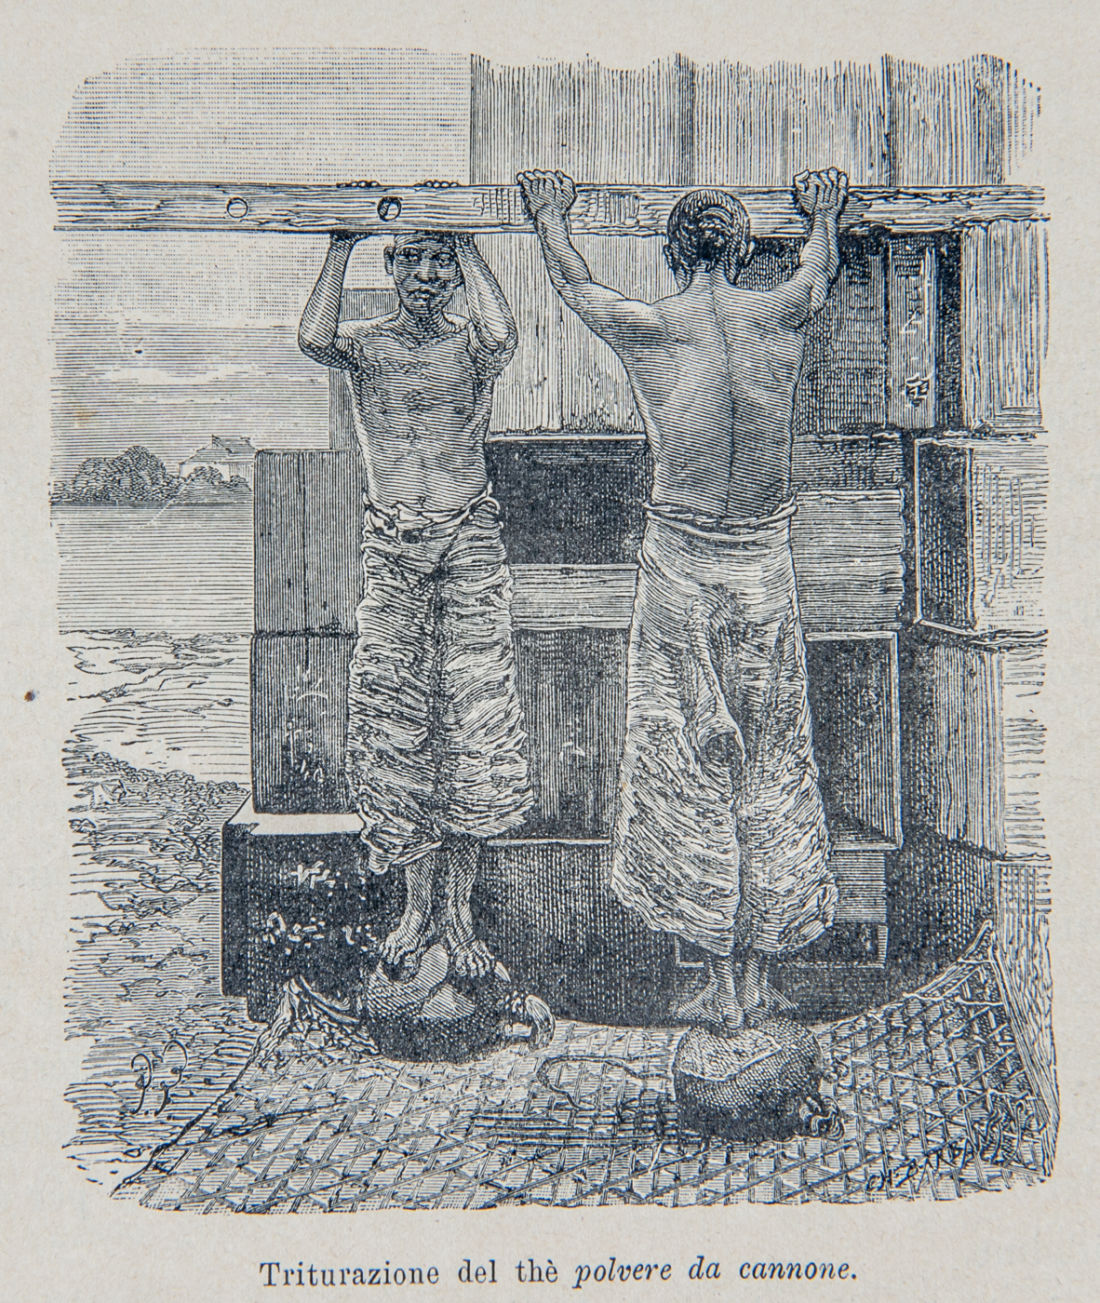 a drawing of two bare-chested men holding on to a wooden beam above their heads and standing on sacks of oolong tea, crushing it with their bodyweight.